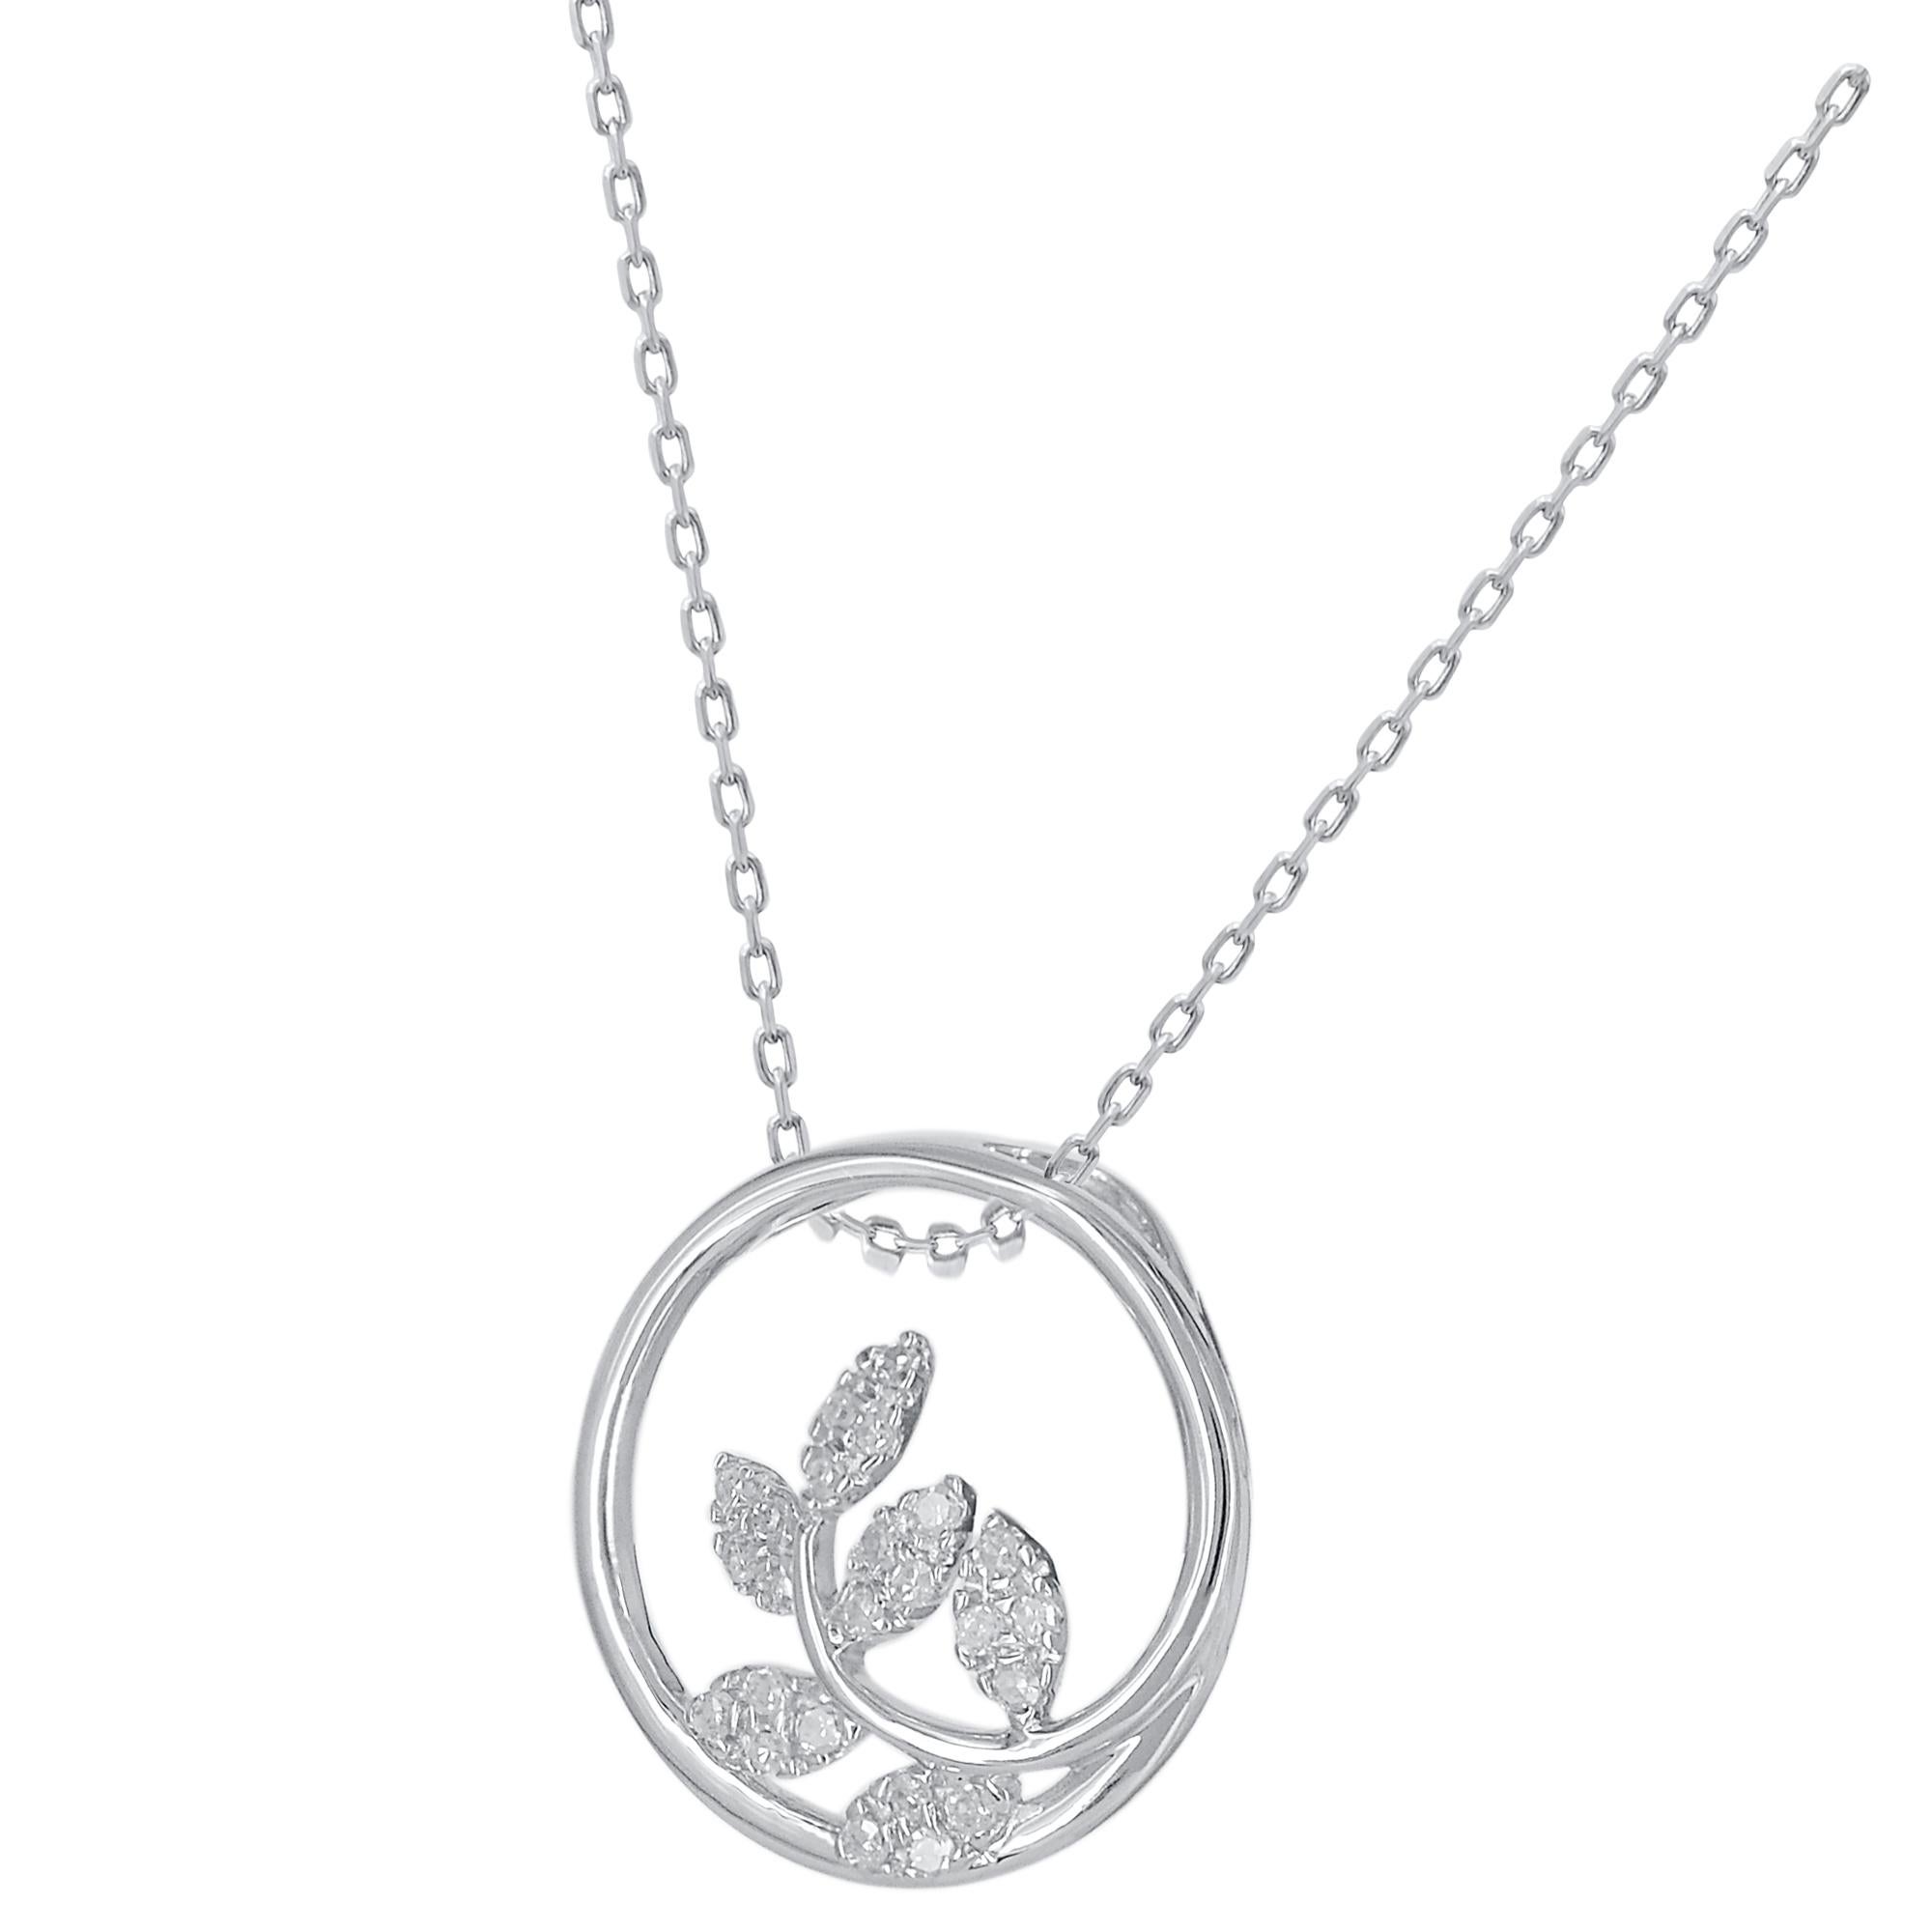 This beautiful circle pendant necklace is studded with 24 single cut round diamonds in prong setting. The total diamond weight of these pendant is 0.07 carats. All the diamonds are H-I color, I-2 clarity. This white gold circle pendant will come